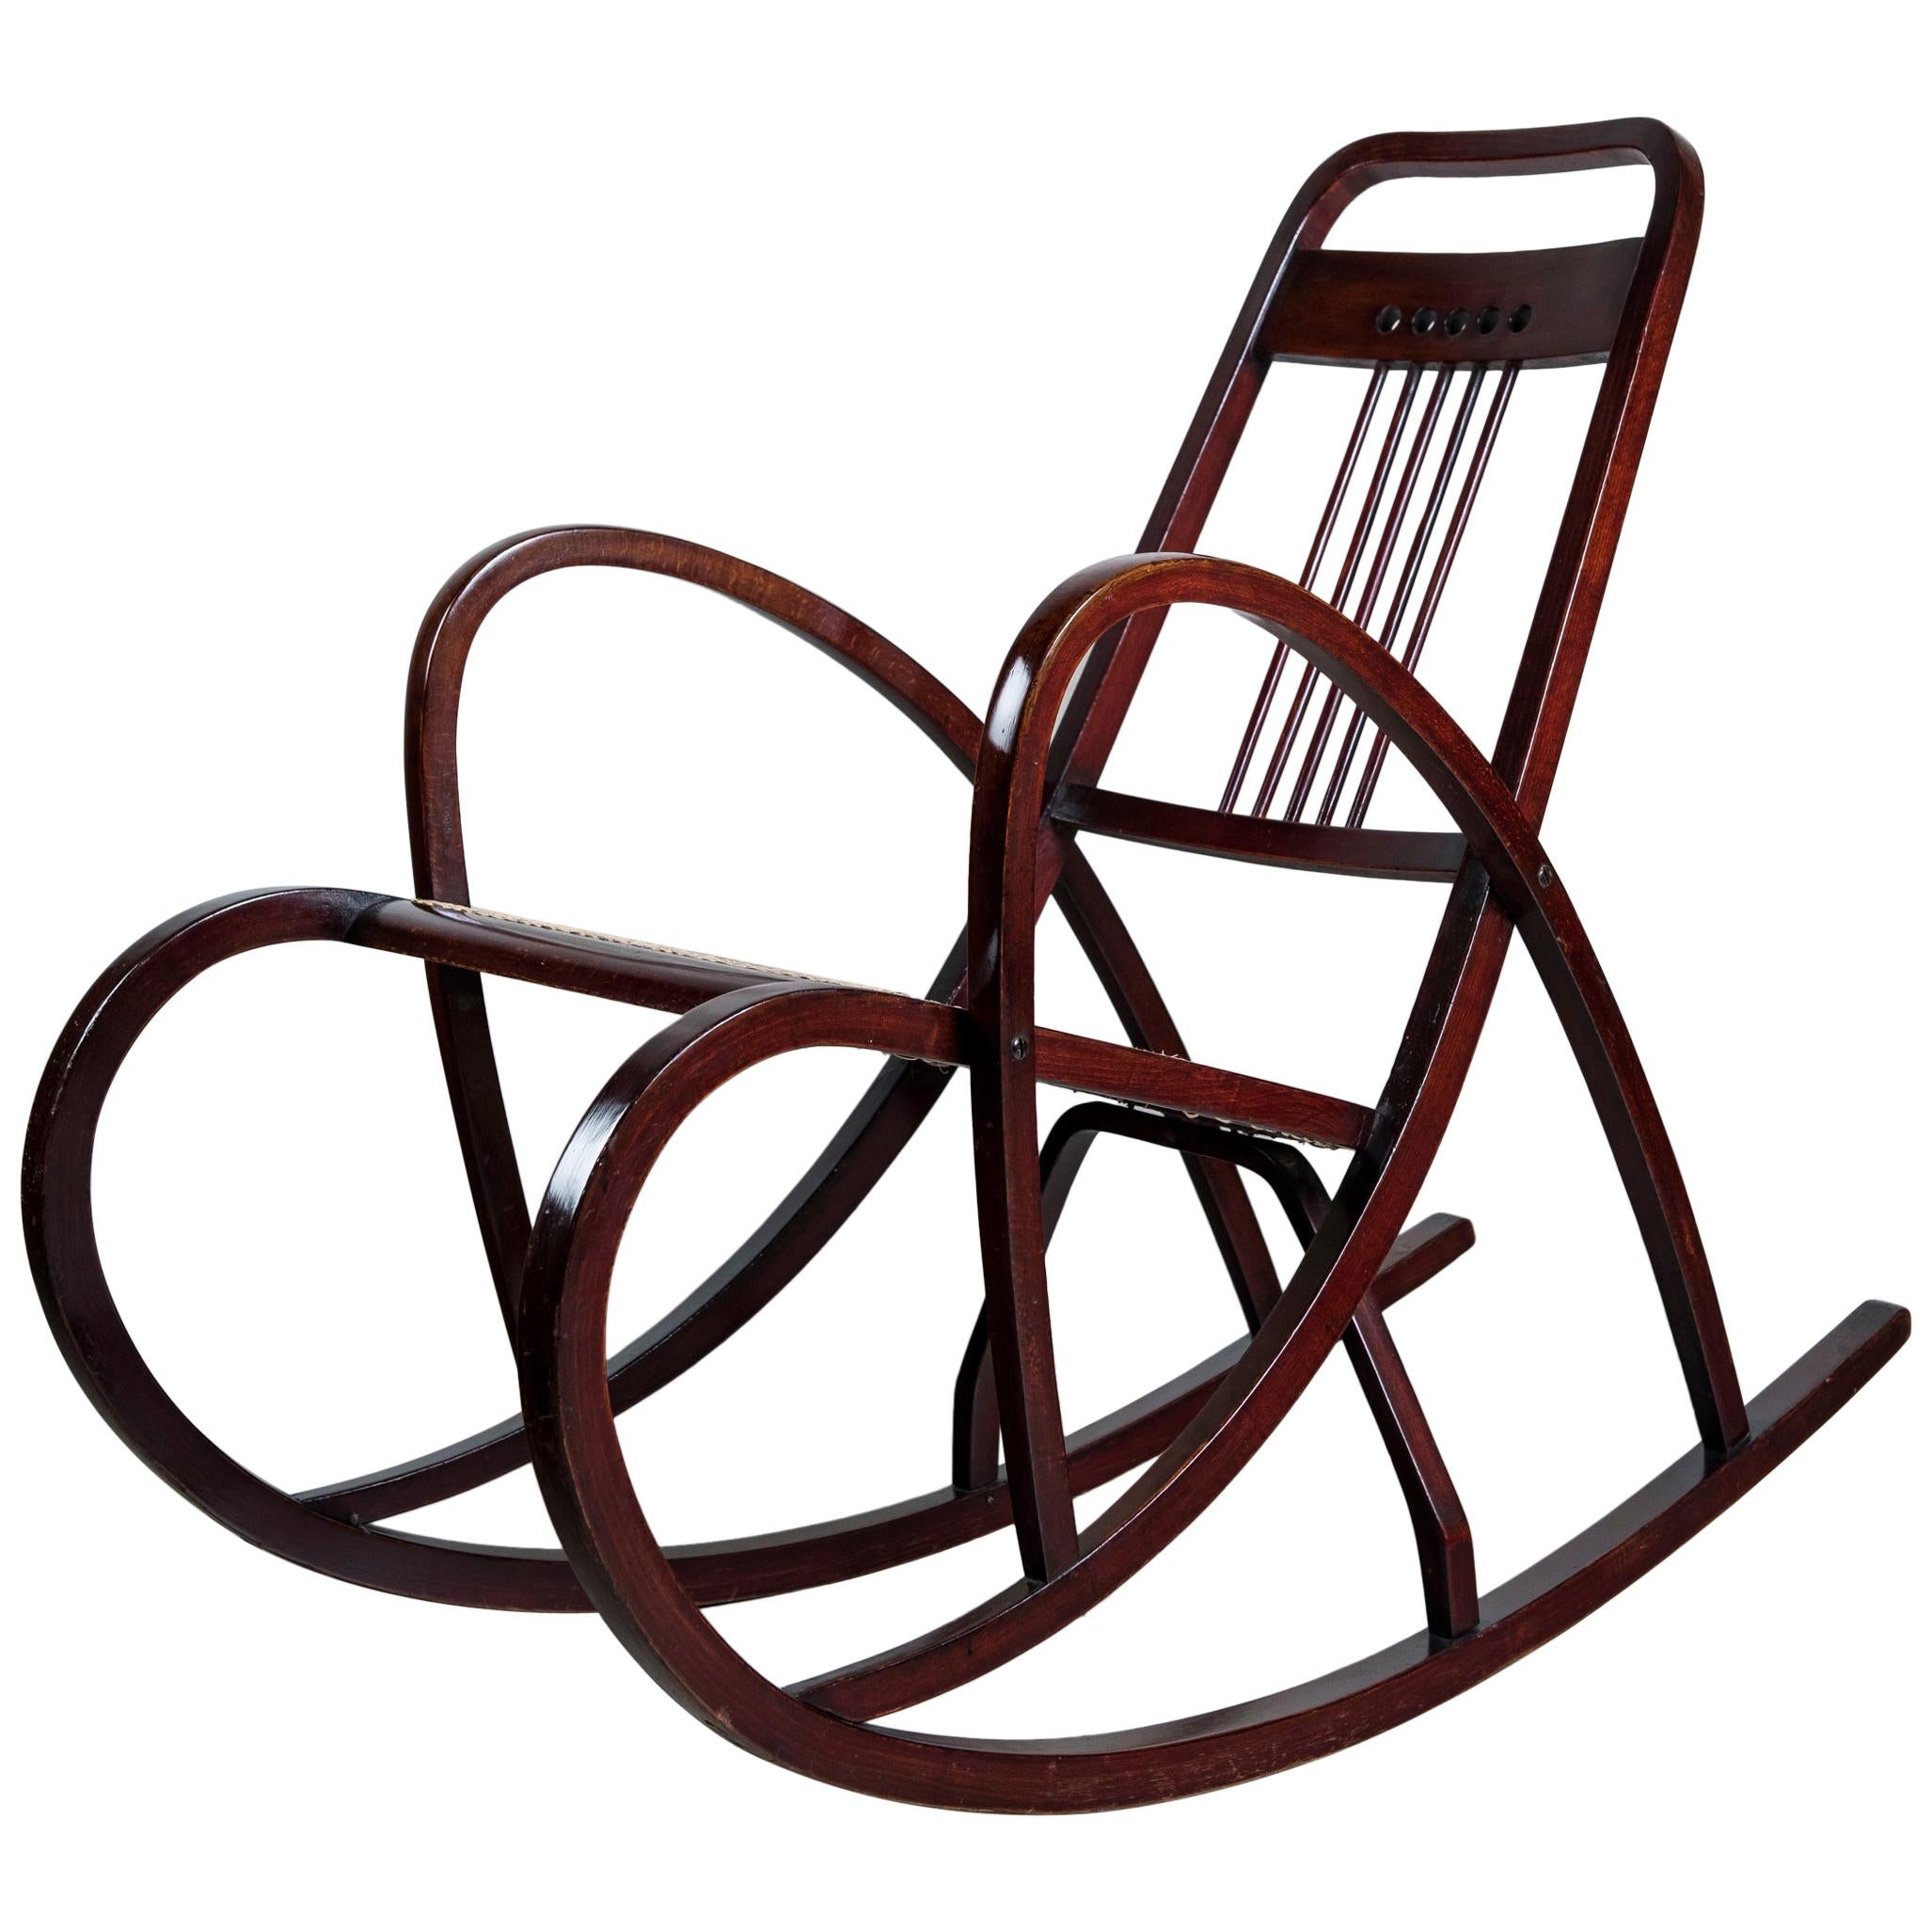 Thonet Rocking Chair, Model Number 511, Vienna Secession, circa 1904